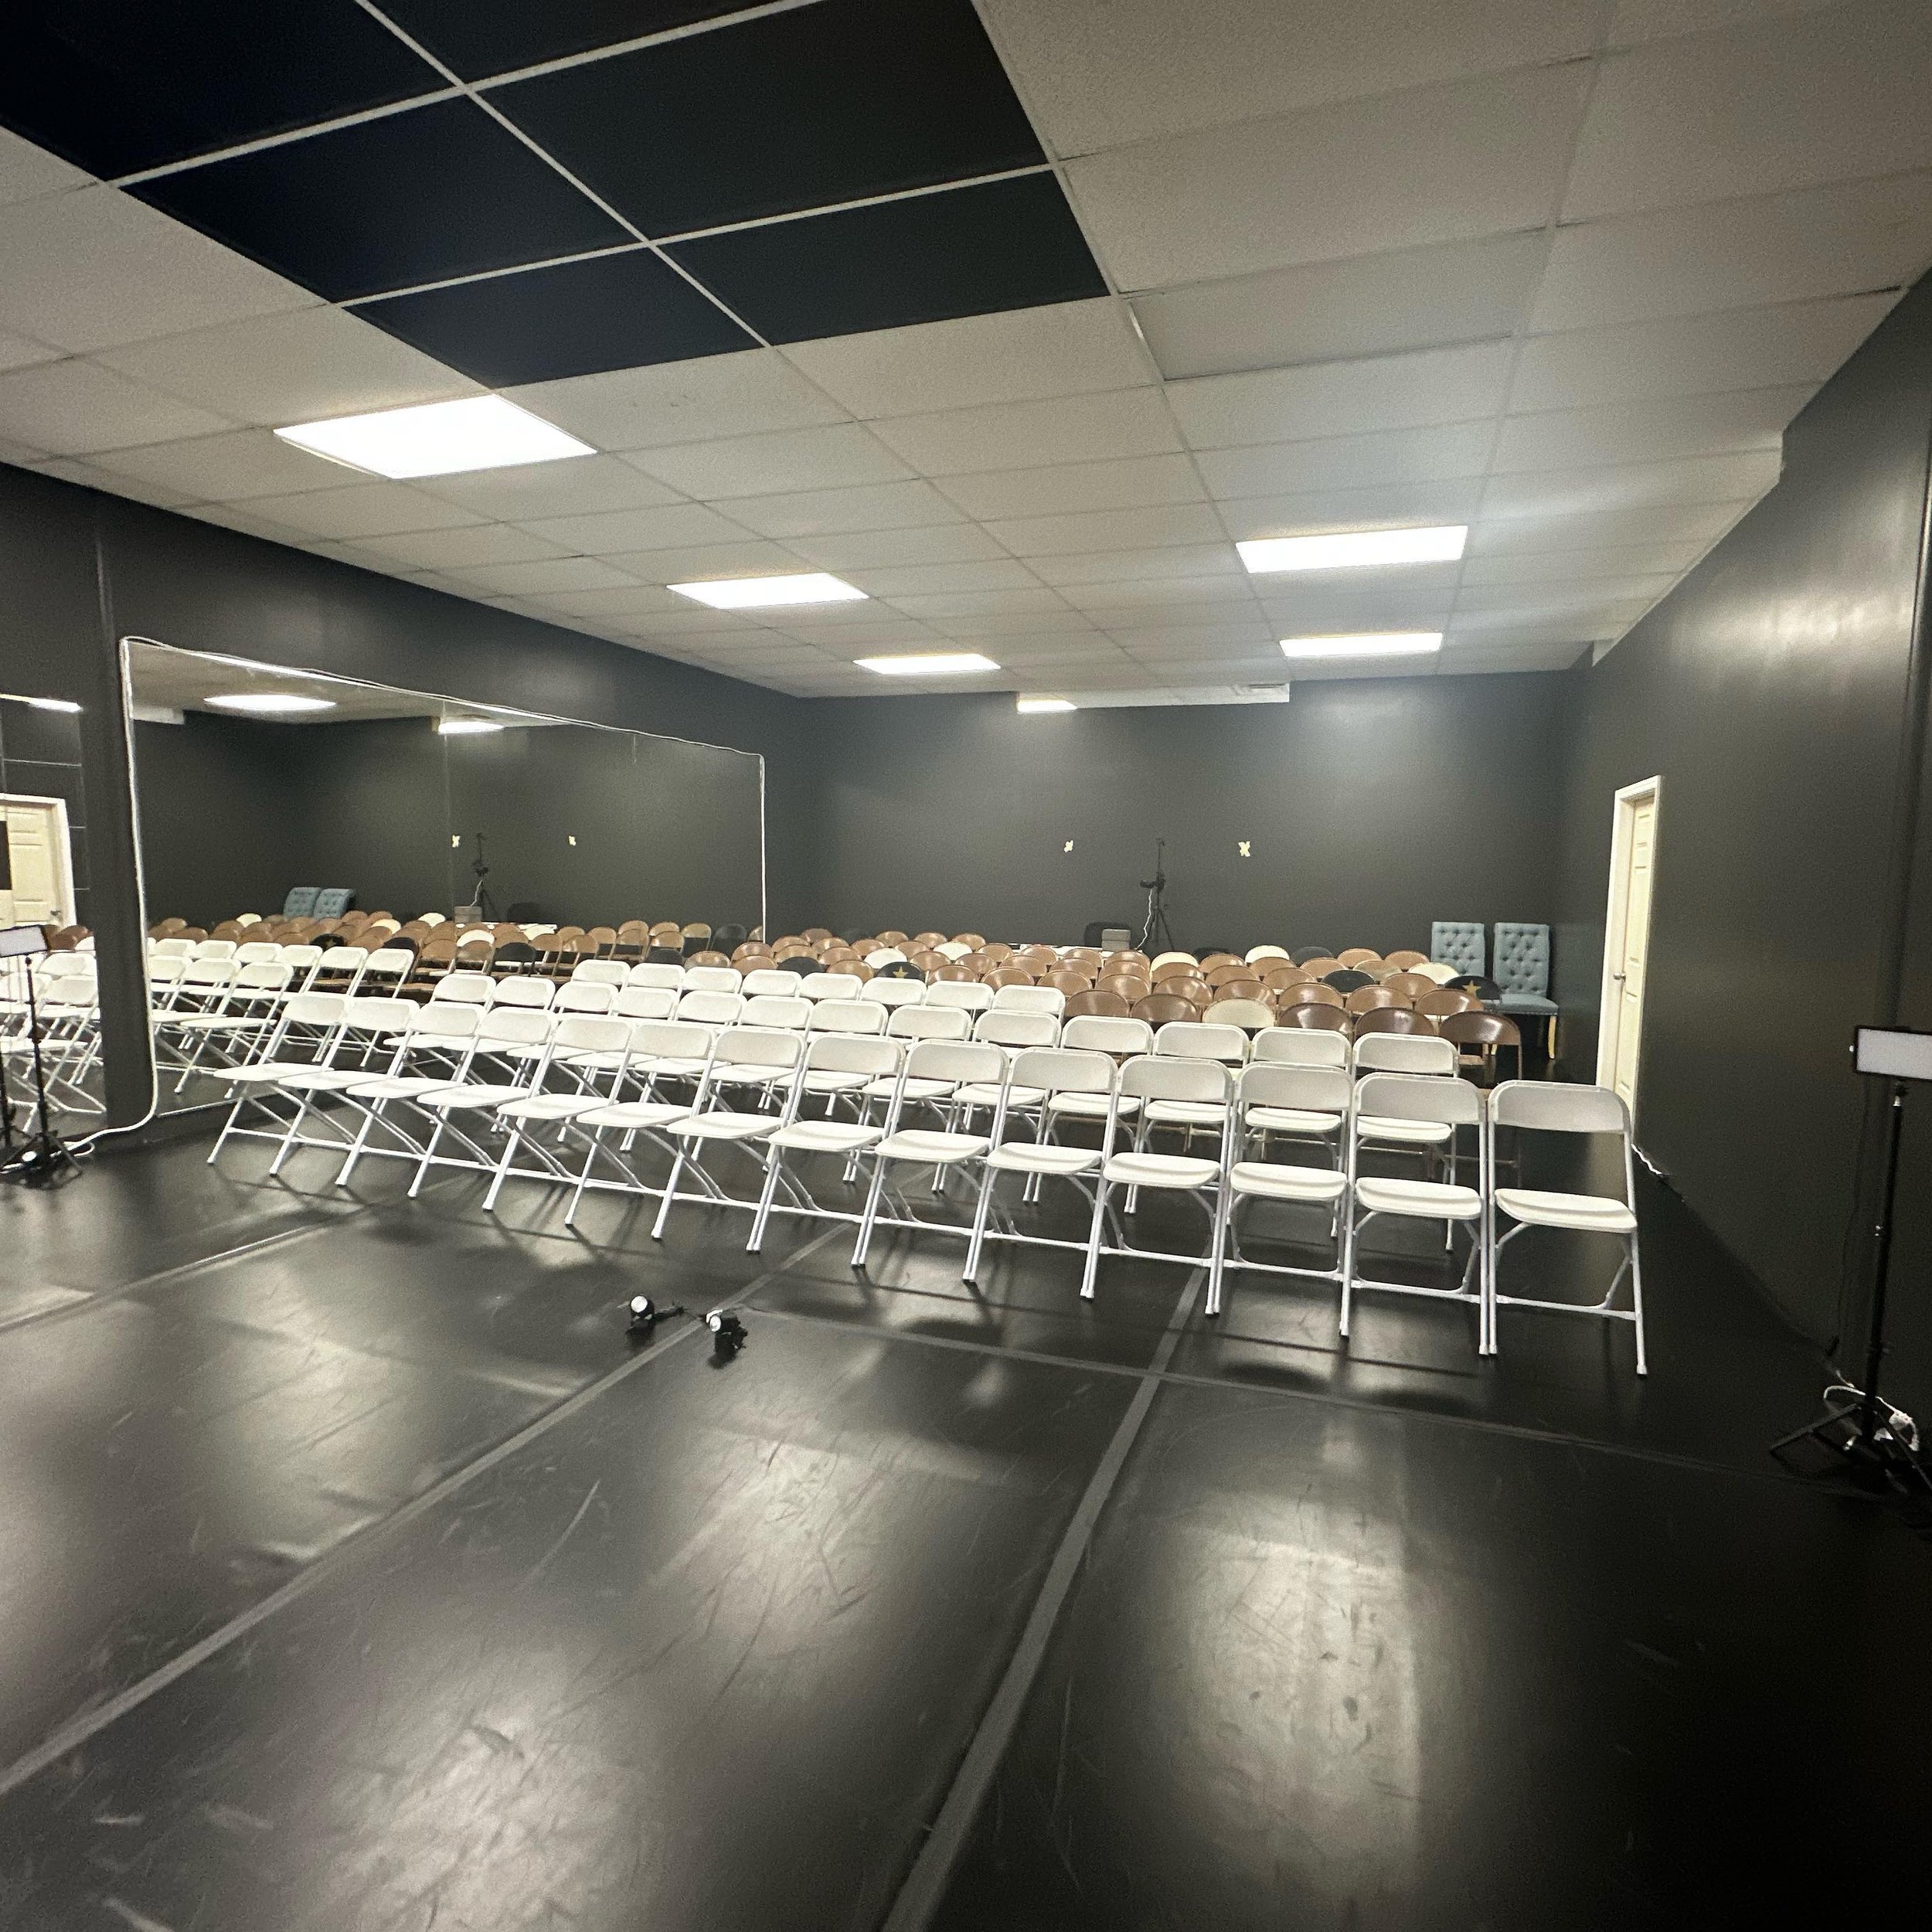 Tomorrow is Alessi Dance Factory&rsquo;s first annual recital! We transformed Studio 3 into a performance room where we will be holding our recital. We are so excited to be able to have over 100 people come in person plus many many more joining us vi